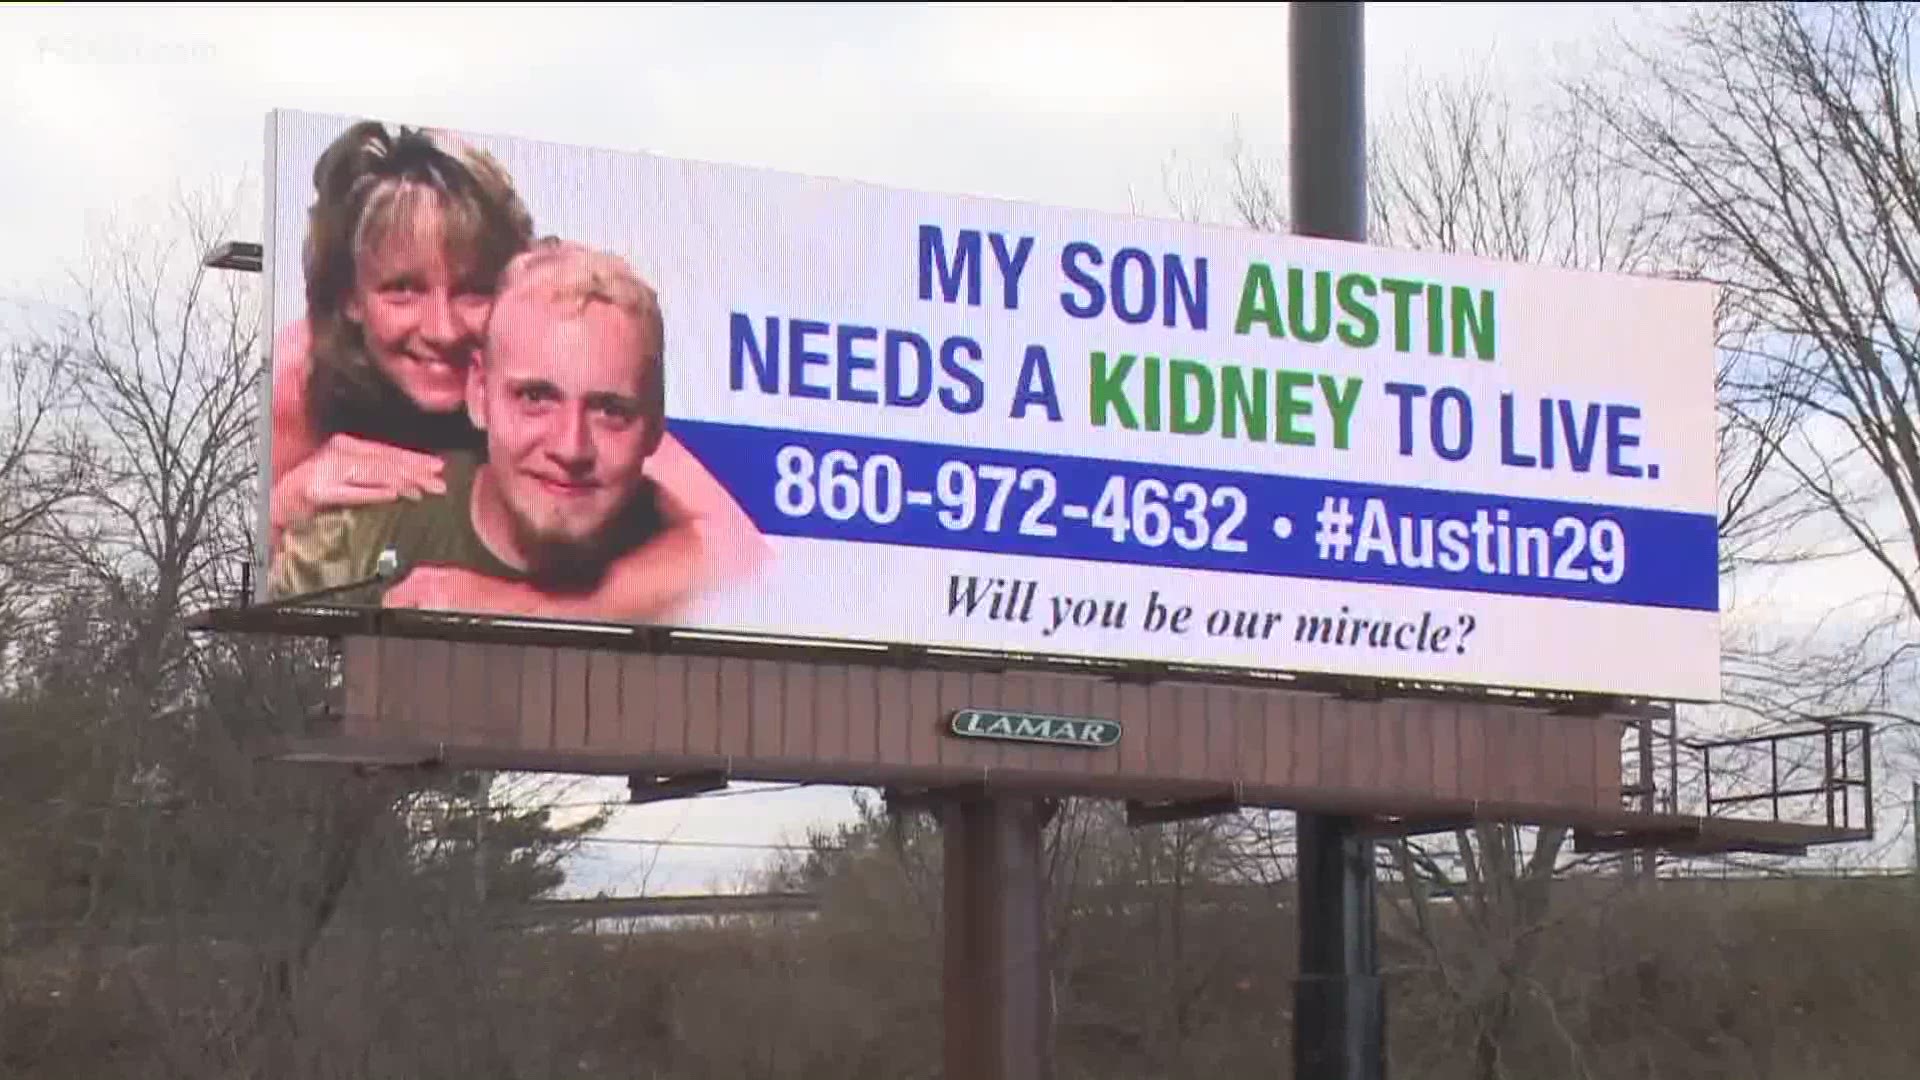 That billboard was seen by thousands of drivers, and one day it was seen by just the right person.